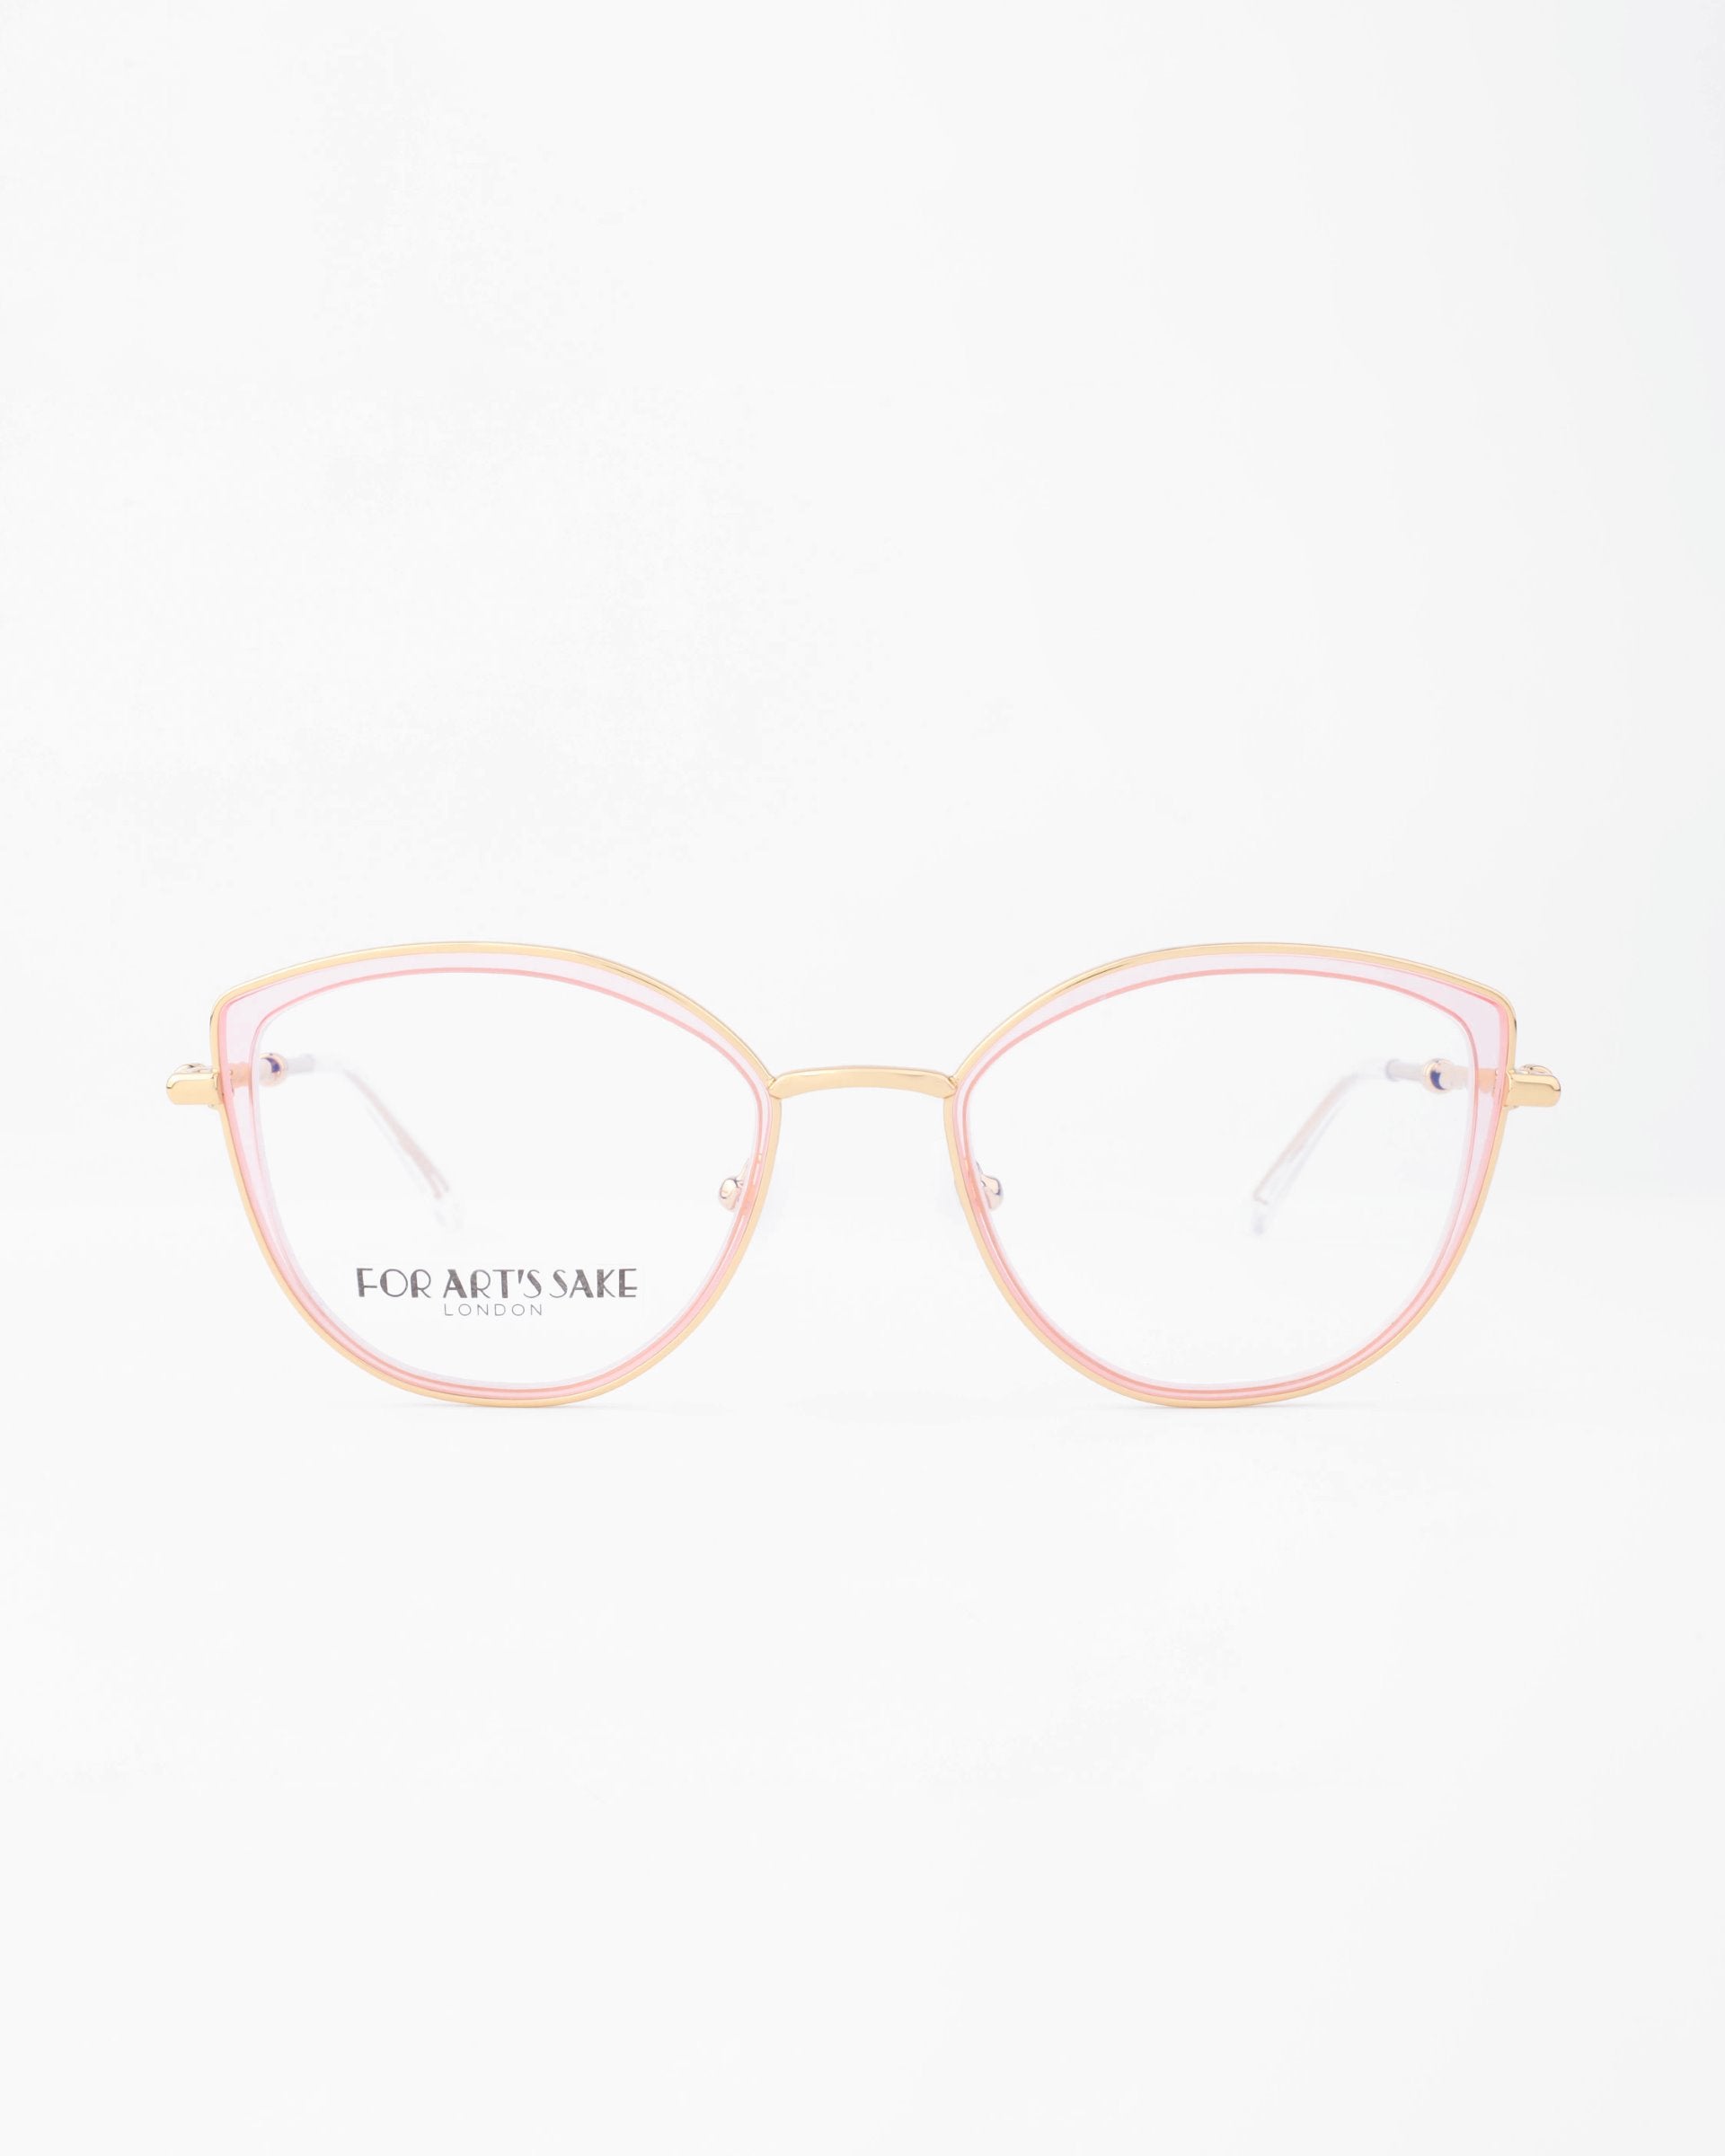 A pair of fashionable eyeglasses with thin, 18-karat gold-plated frames and light pink accents around the lenses. The left lens has "FOR ART'S SAKE®" printed in black on it. These stylish glasses, which come with a blue light filter option, are displayed against a plain white background.